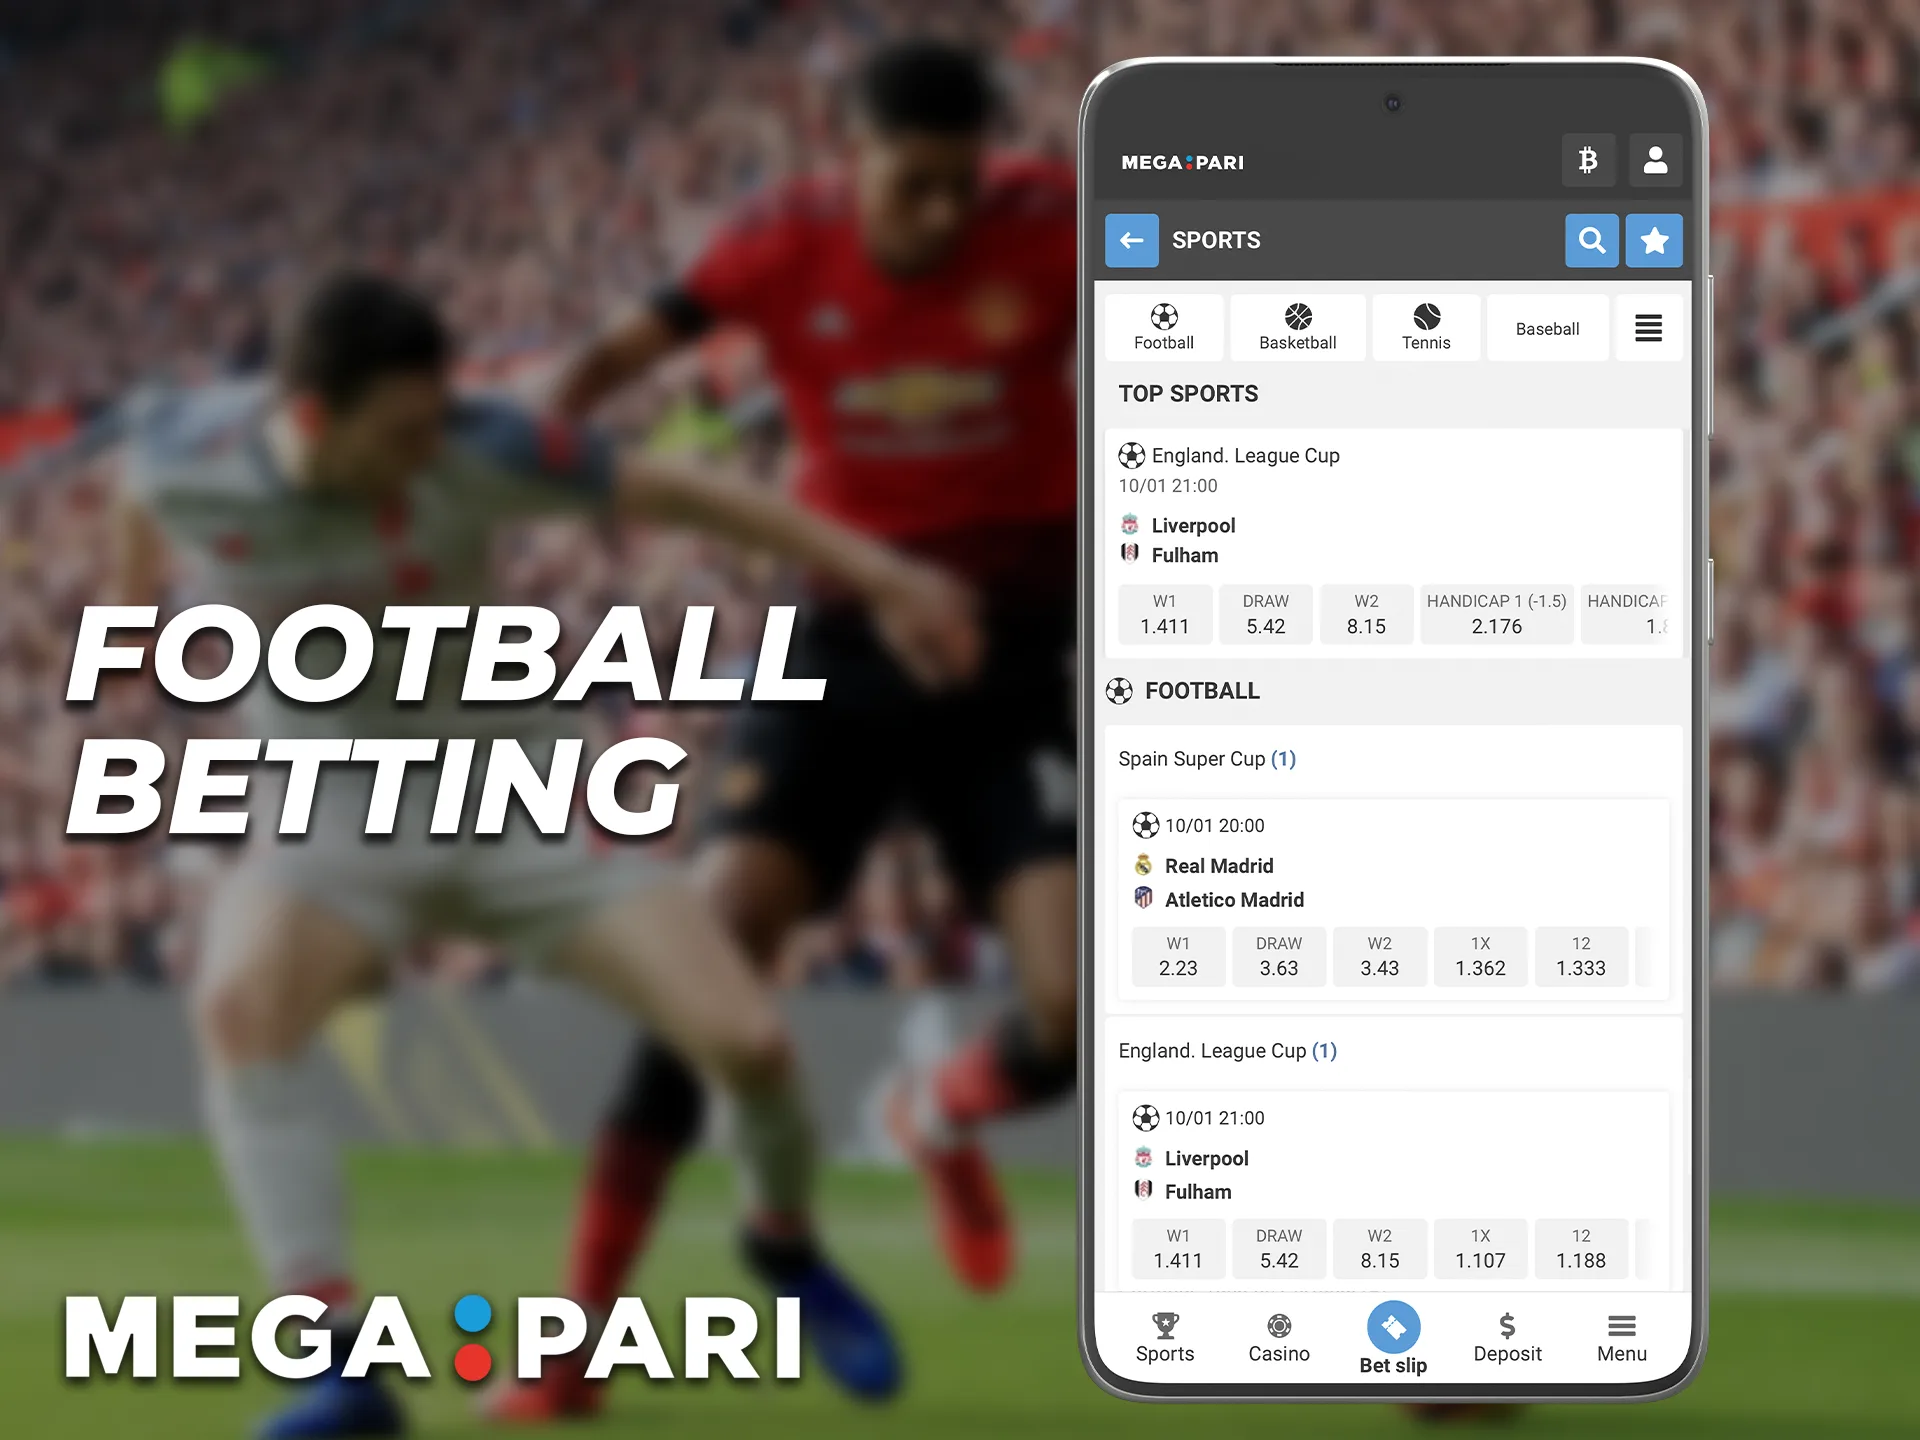 The Megapari app features many leagues and championships on football.